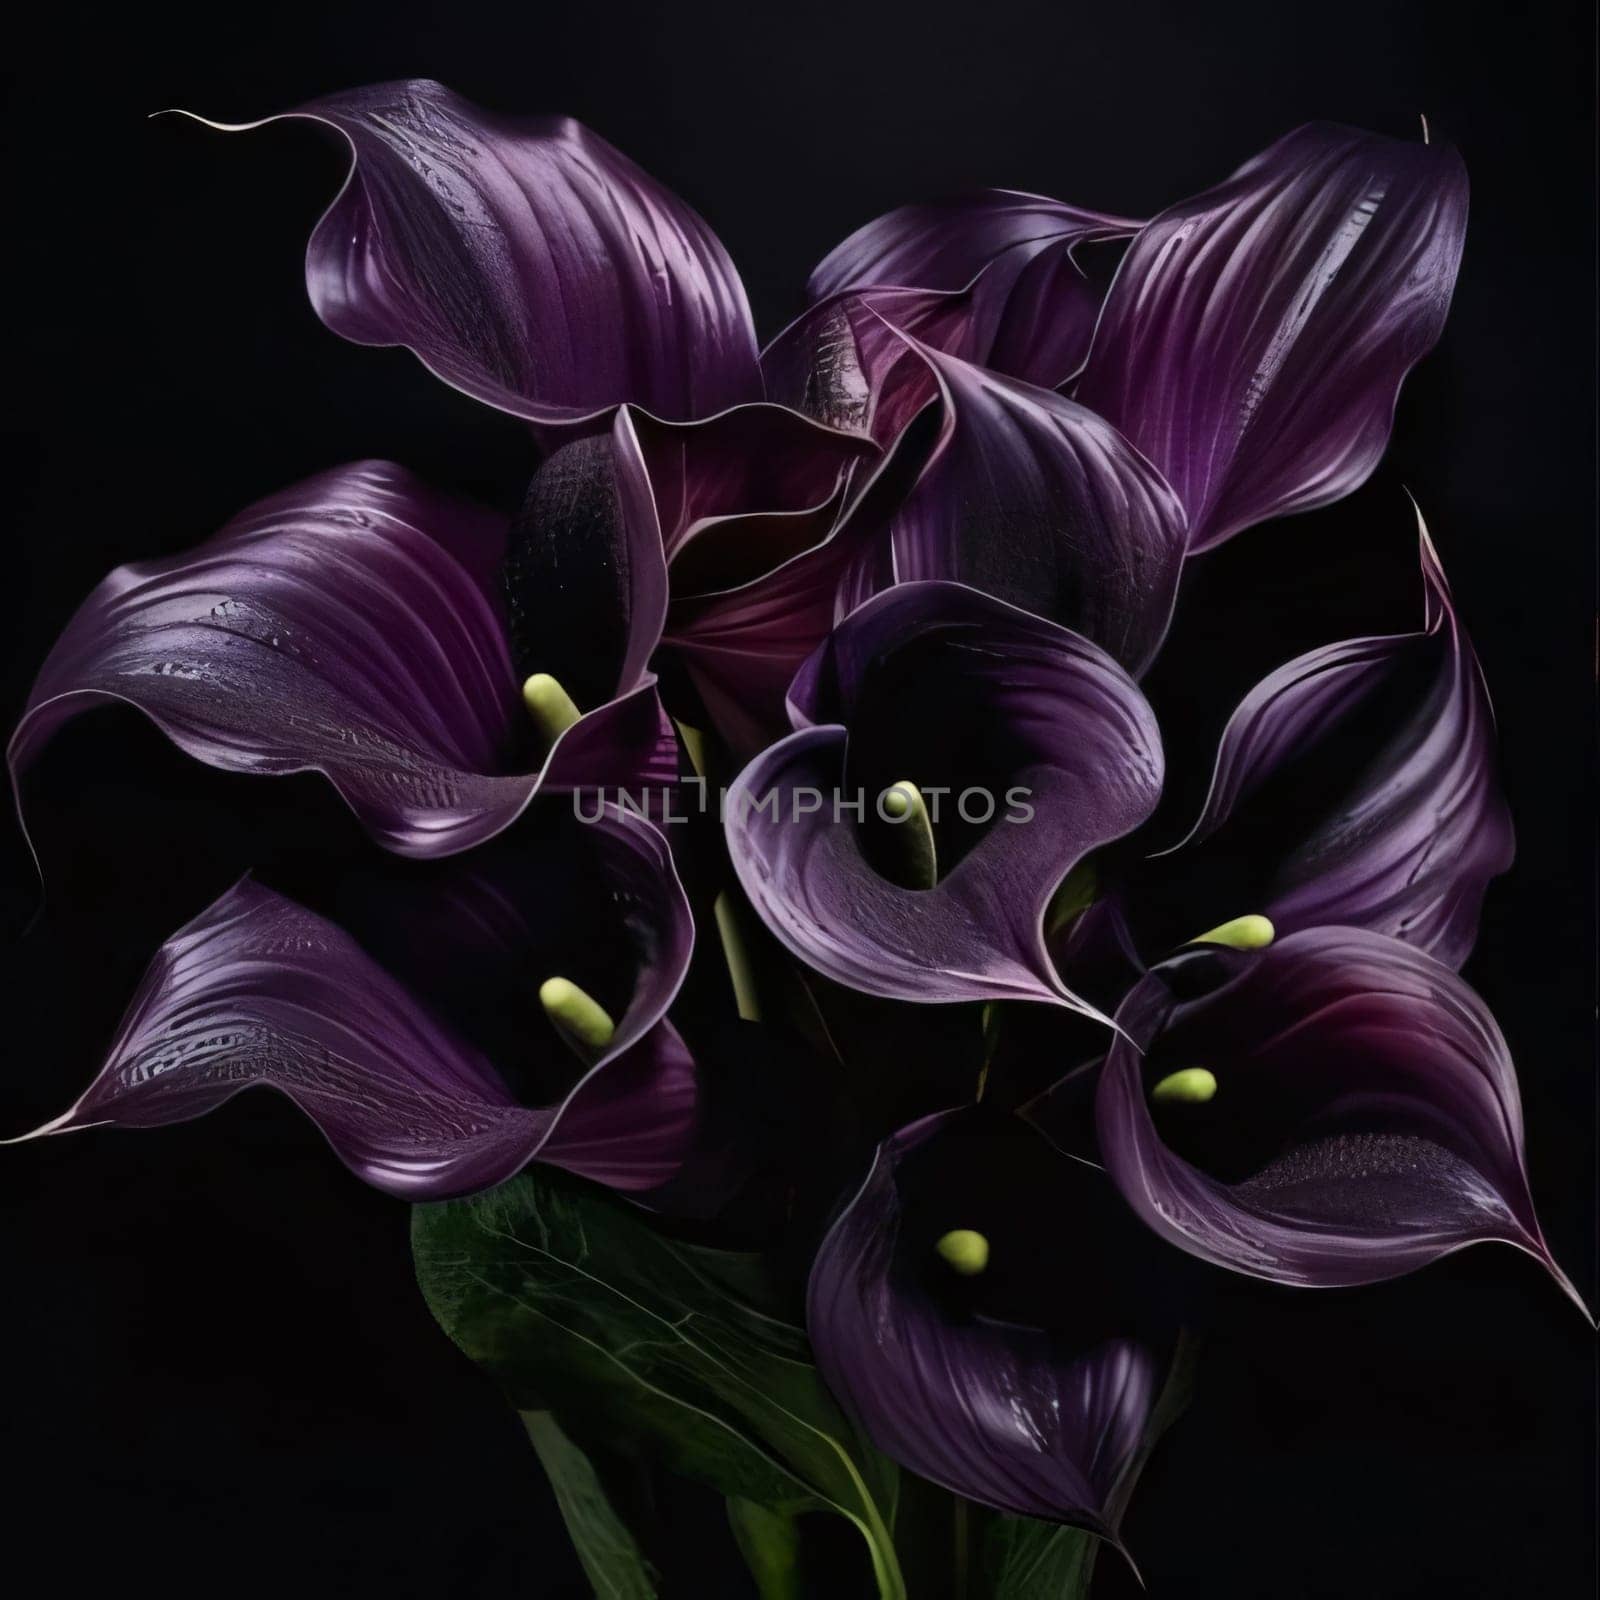 Purple lilies bouquet of flowers on a dark background. Flowering flowers, a symbol of spring, new life. by ThemesS